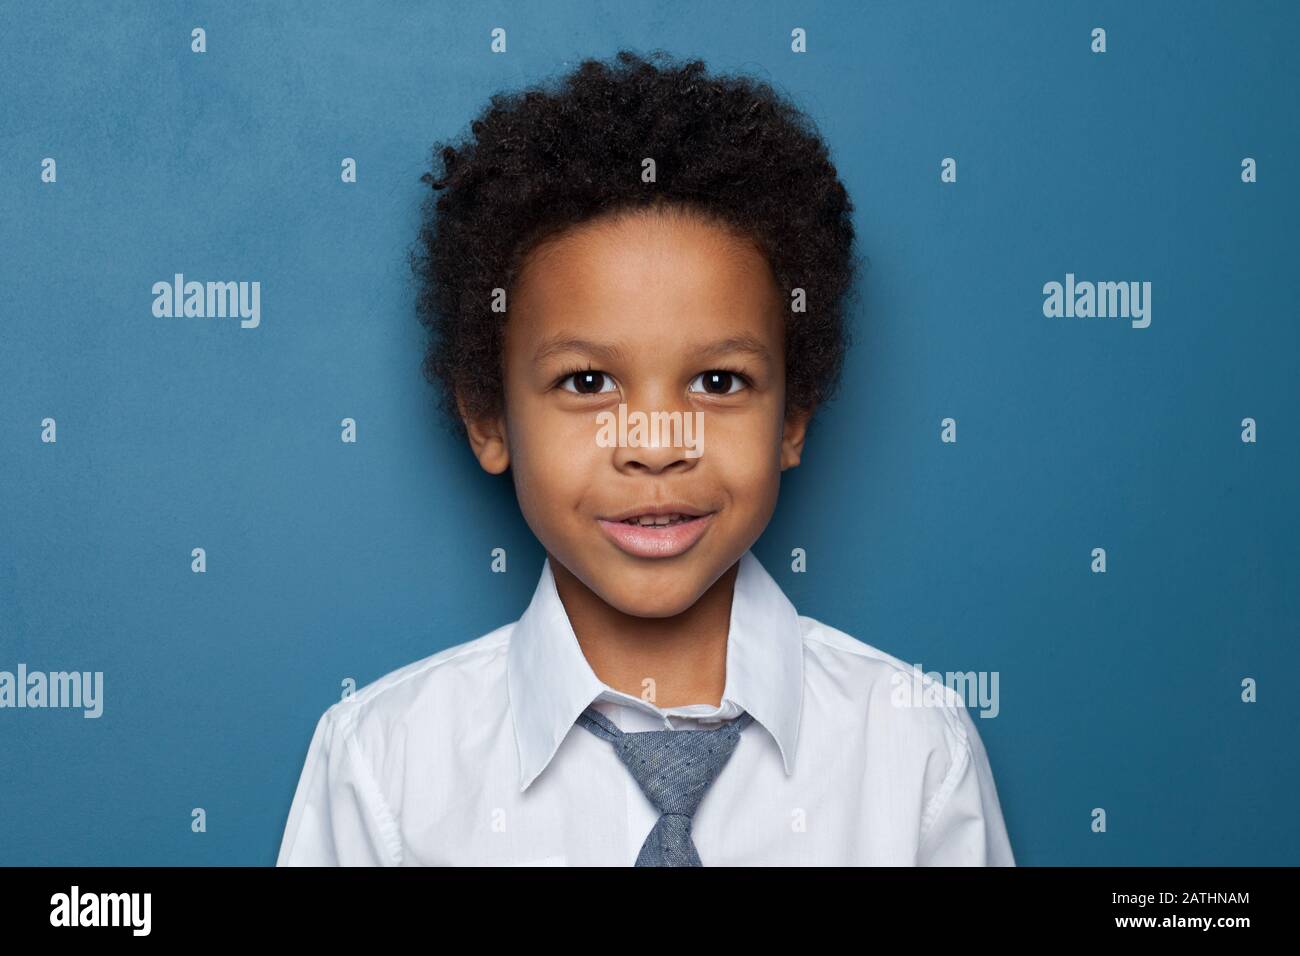 Cute curious African American child schoolboy student 6 years old on blue backgroung. Black kid boy portrait Stock Photo